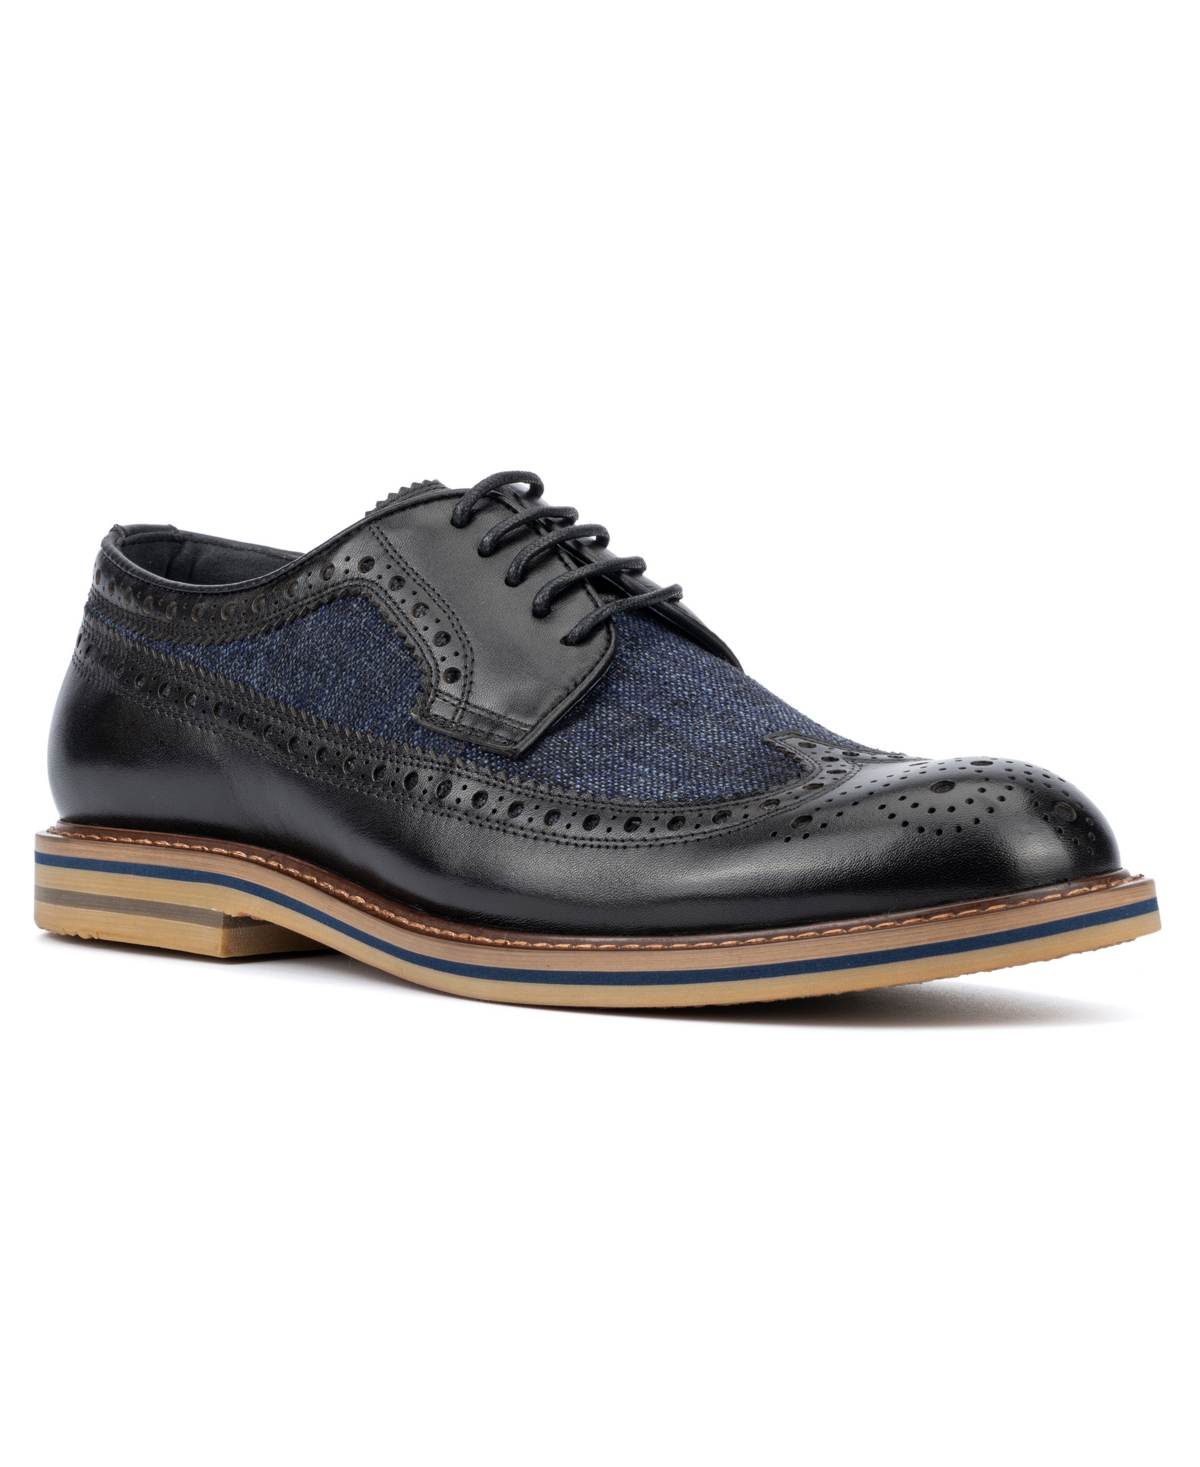 Vintage Foundry Co Men's Falcon Oxford Shoes In Black